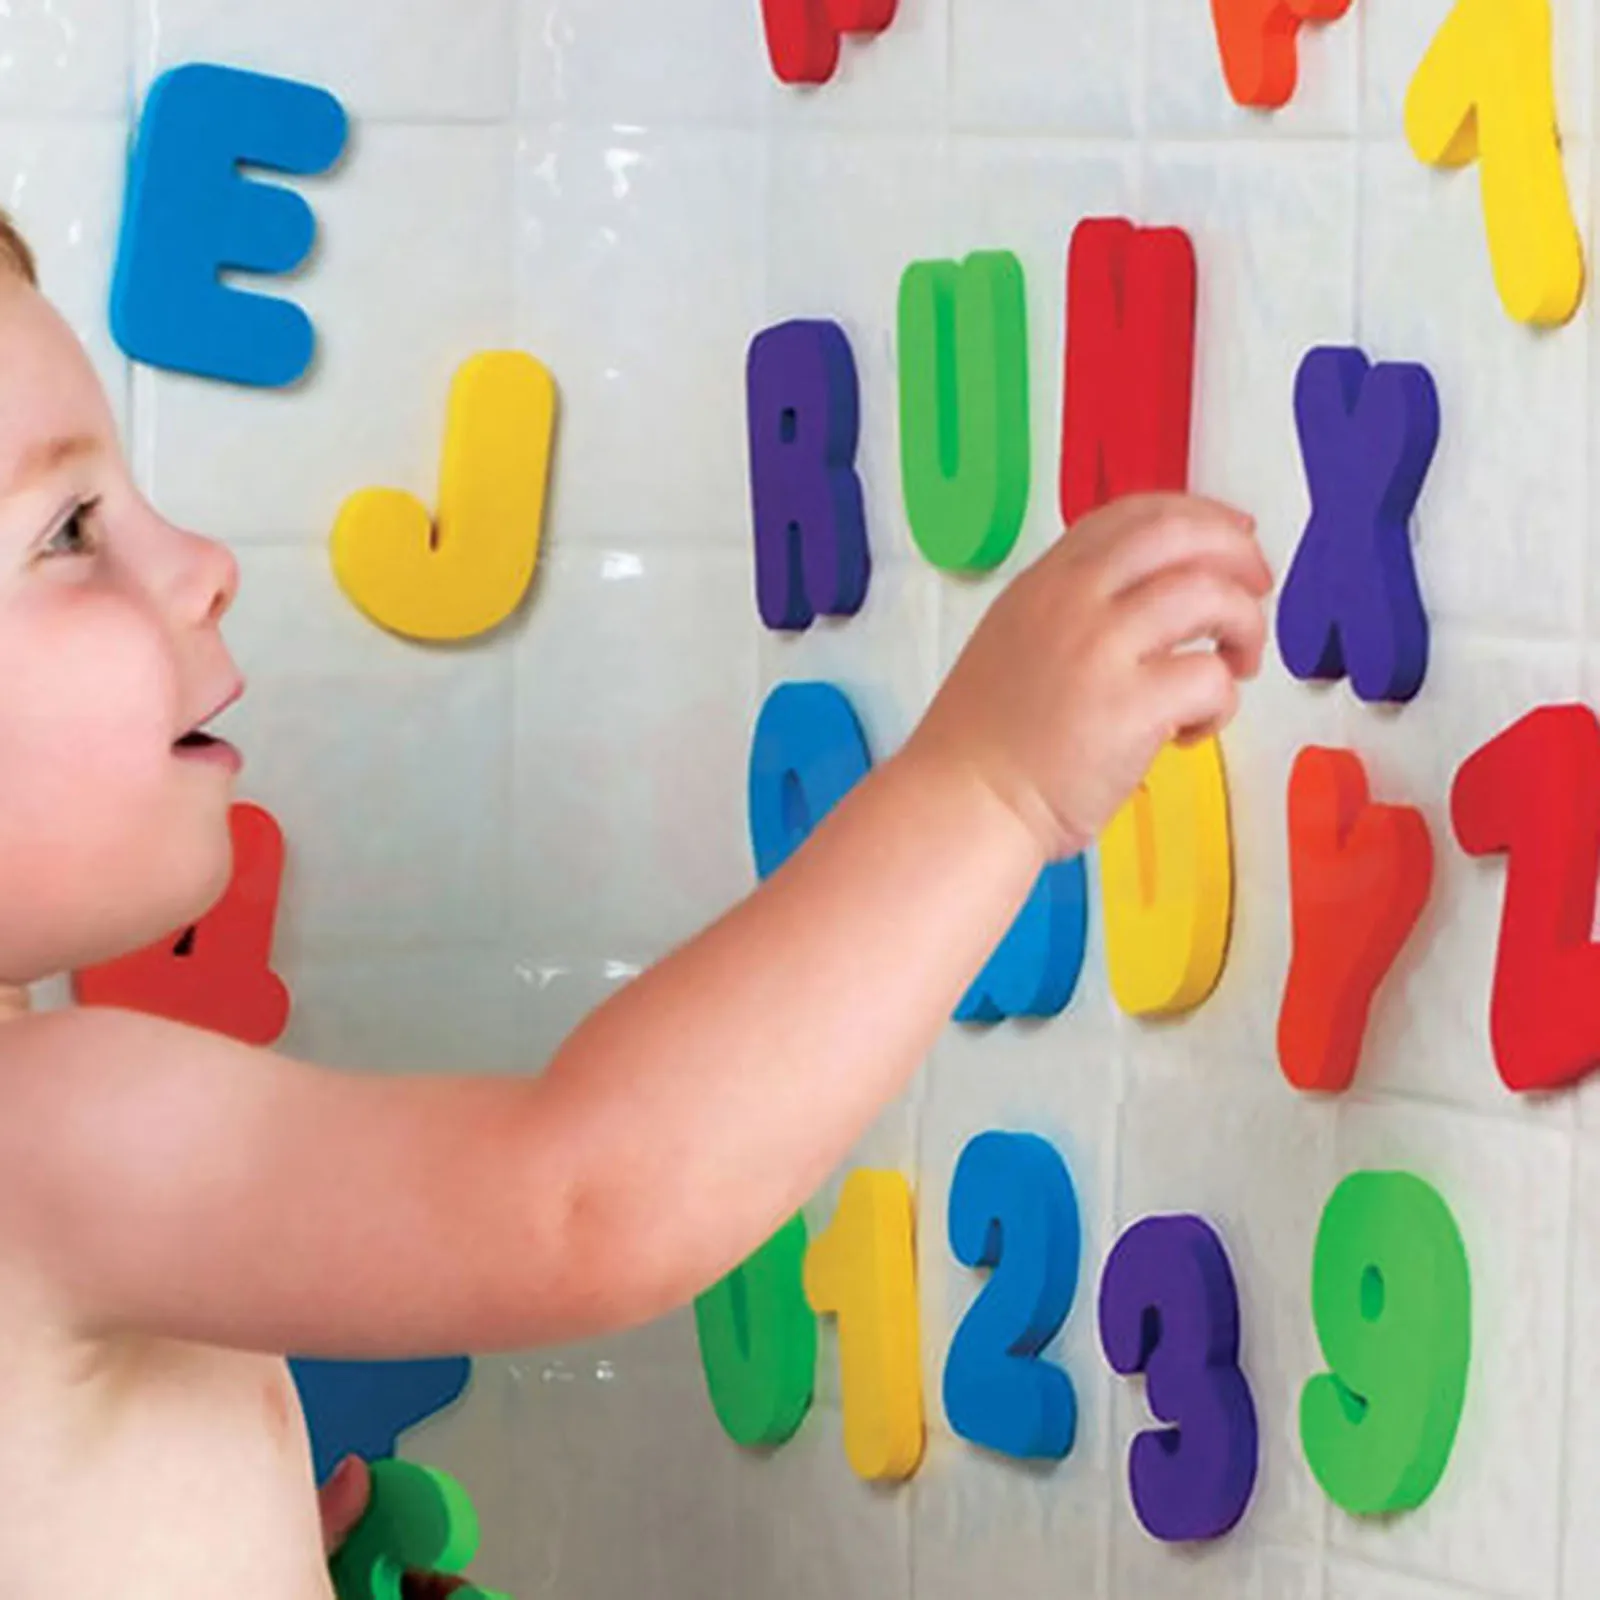 

Children's Bath Toy Literacy Toys English Alphabet Numbers Baby Literacy Learning Enlightenment Early Education Cognitive Toys